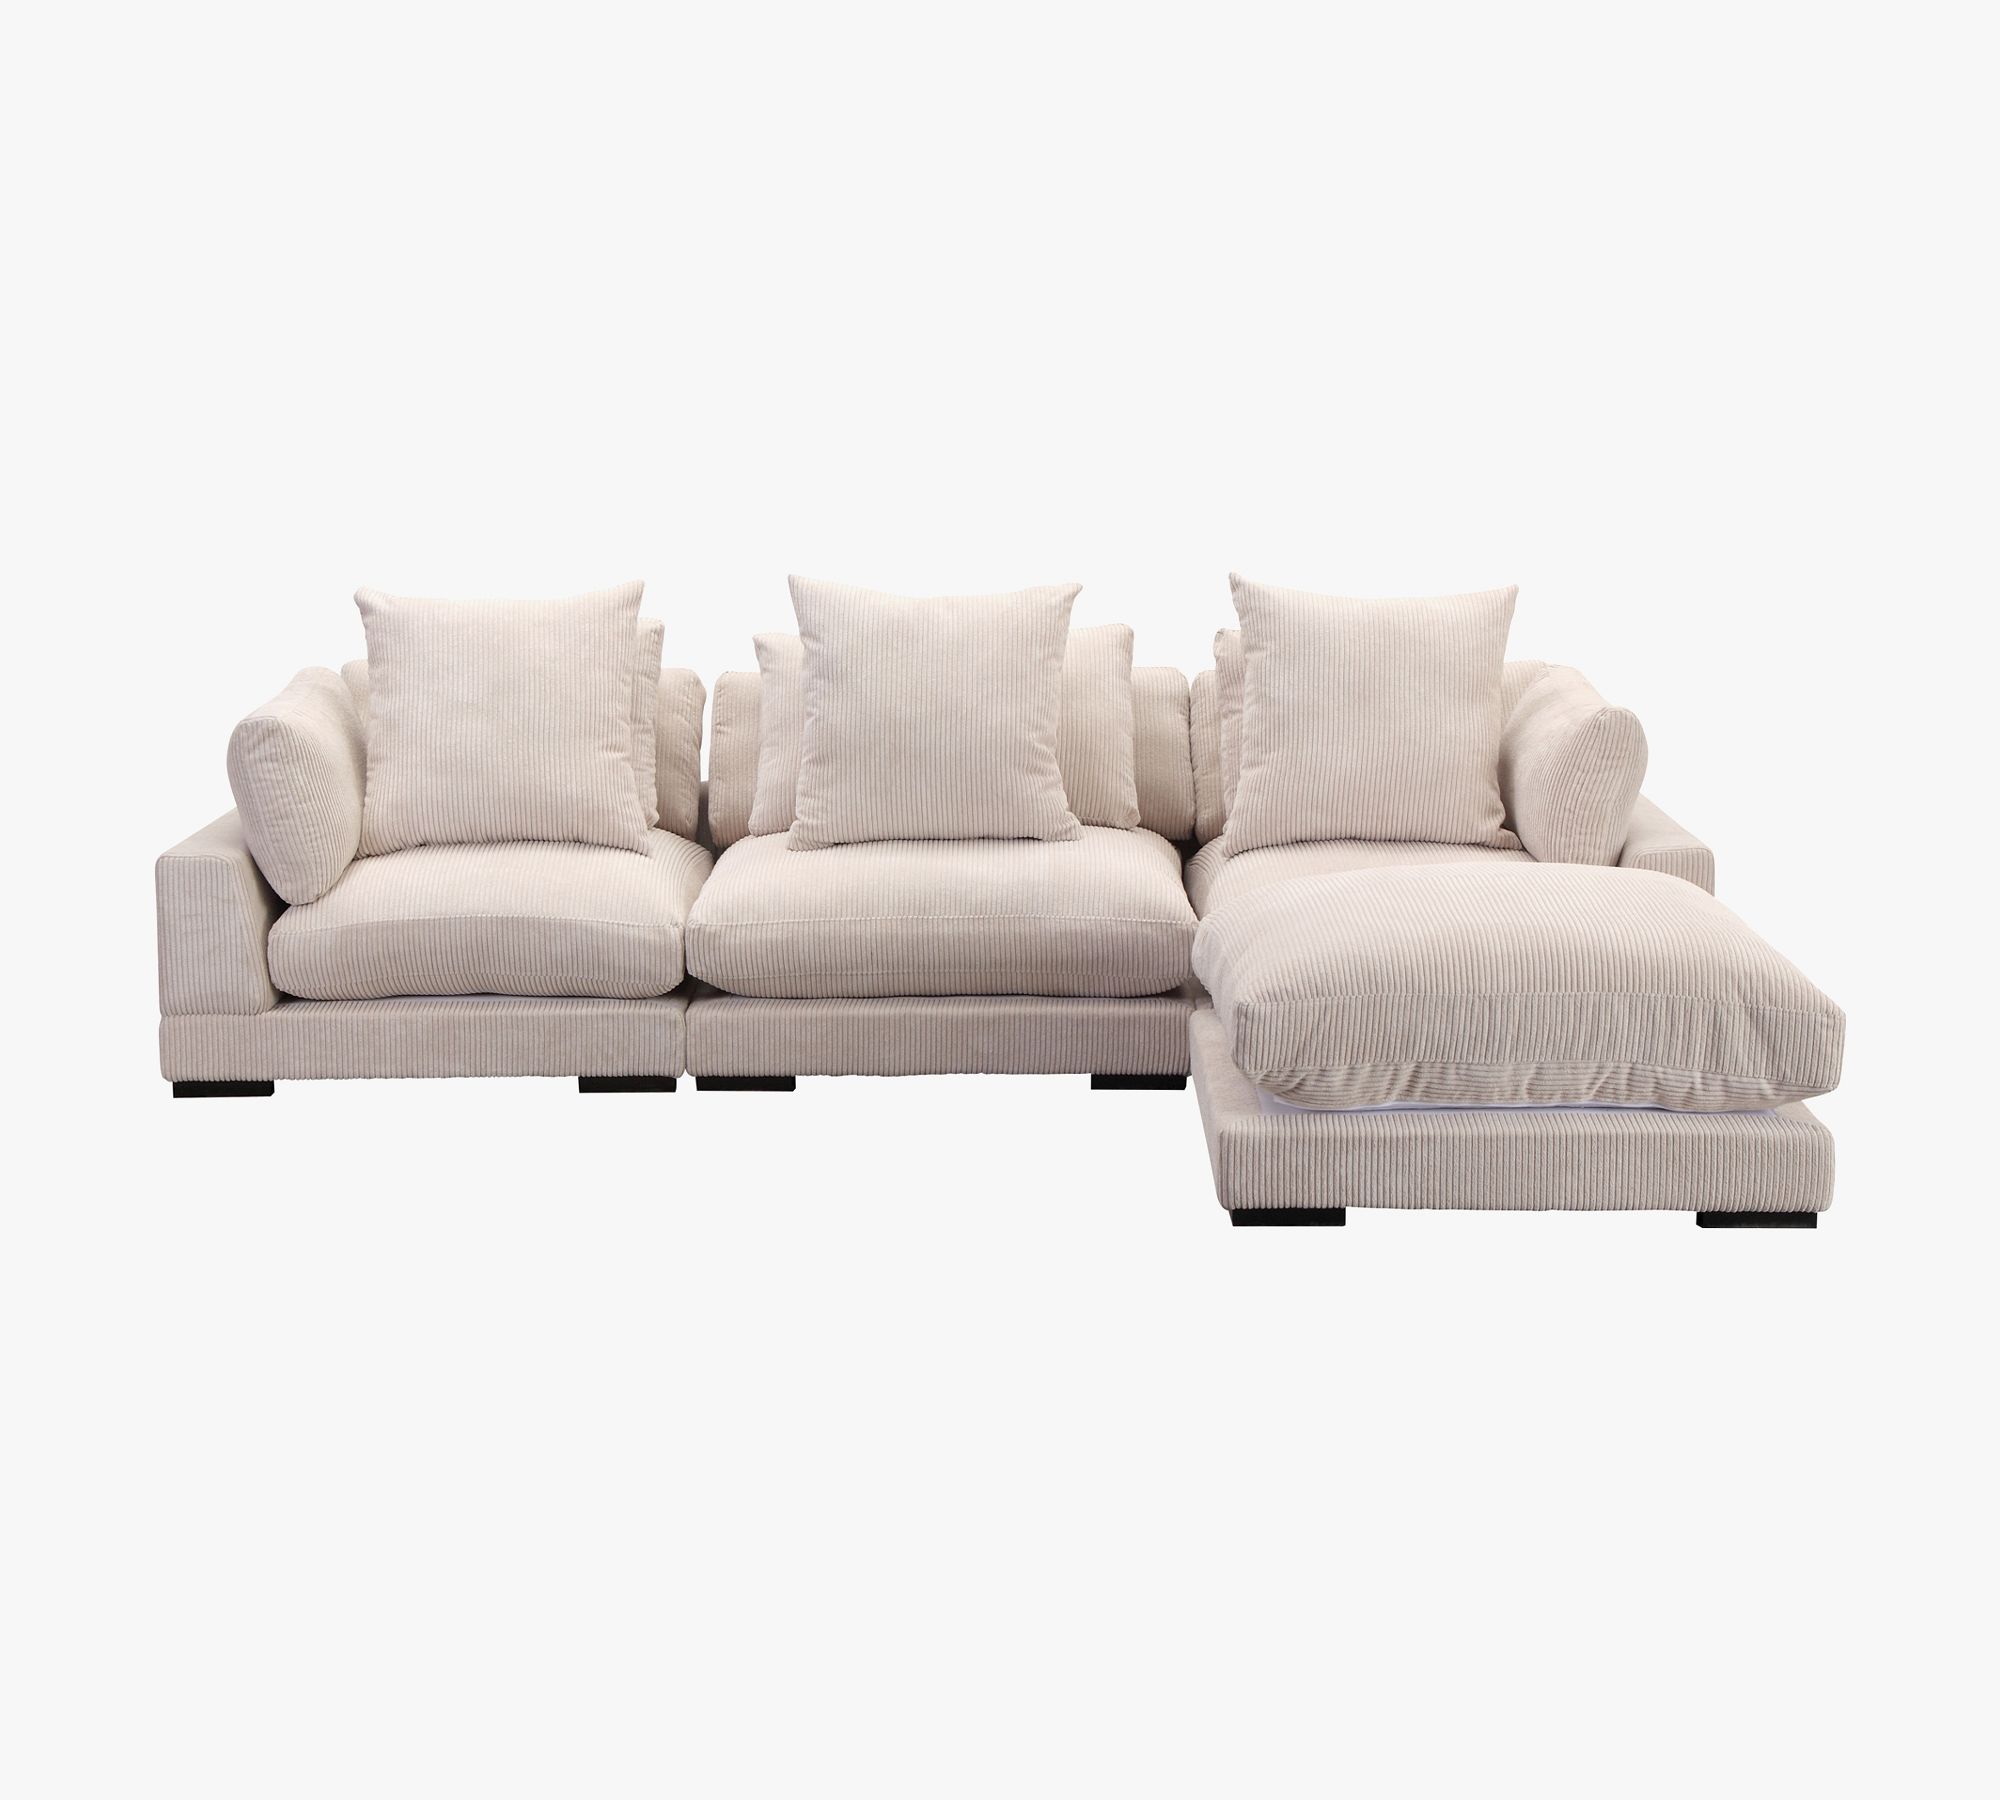 Meritage Modular Chaise Sectional